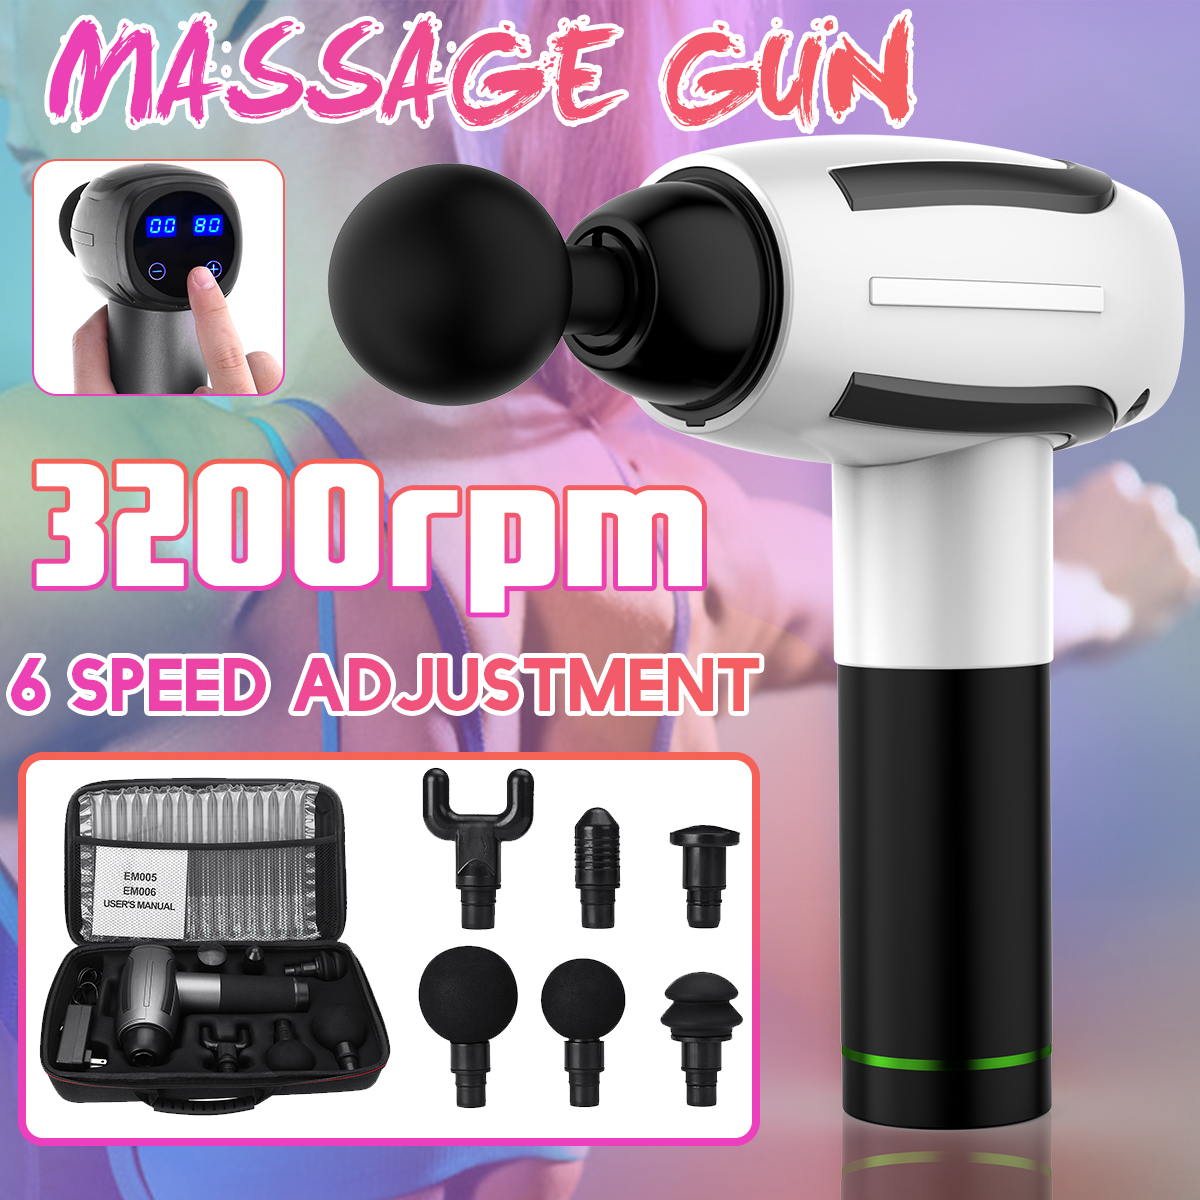 1500mah-6-speed-Display-Brushless-Muscle-Relief-Massage-Quiet-Vibration-Deep-Tissue-Electric-Massage-1621873-1